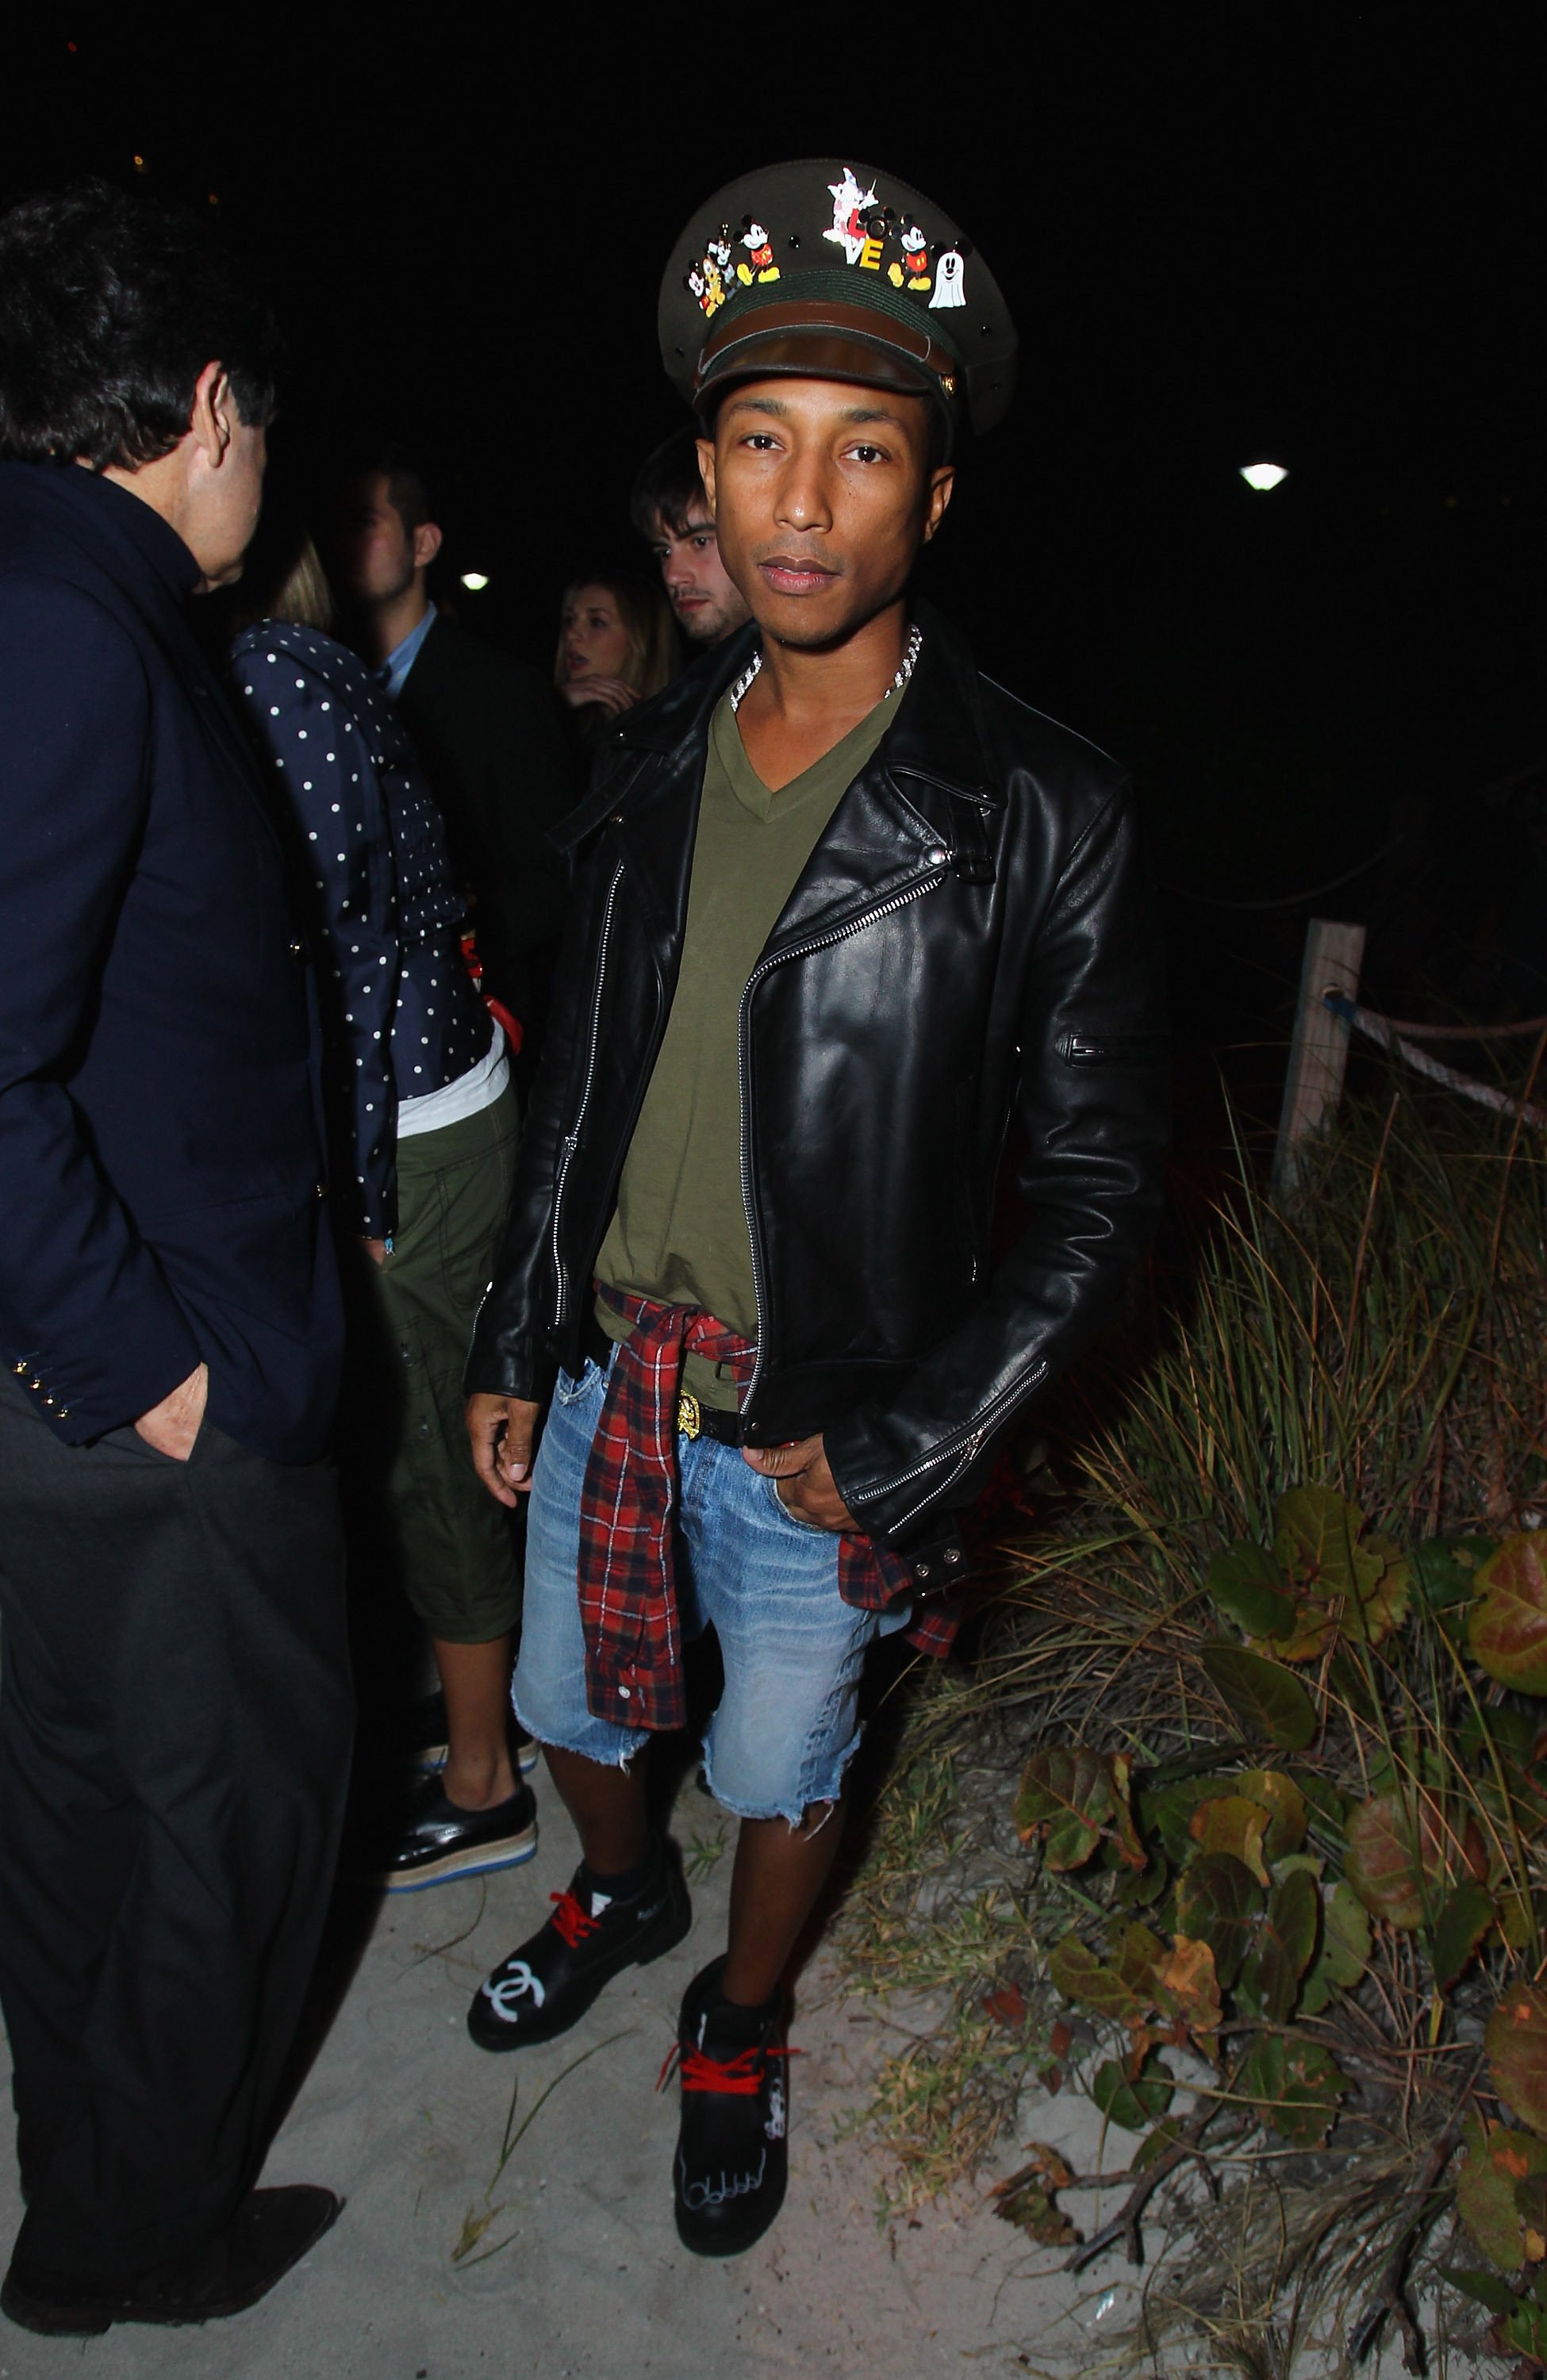 9 of Pharrell Williams' boldest fashion moments: Louis Vuitton's new  menswear creative director wore Nike boots at Cannes, a reflective Adidas  suit at the Grammys, and a purple Hermès Birkin in NYC